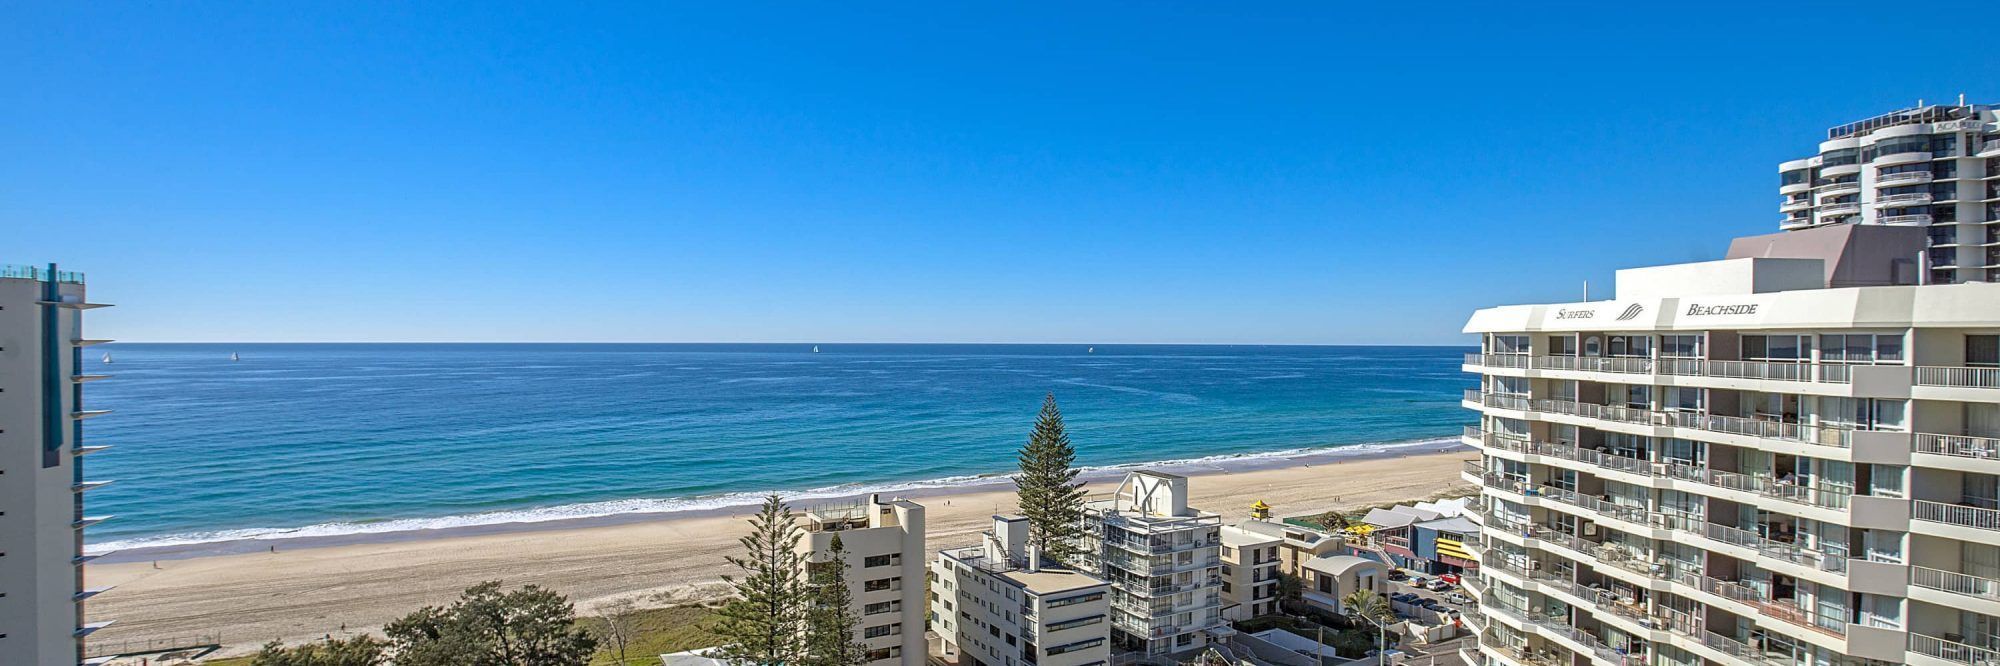 surfers paradise accommodation for 2 years